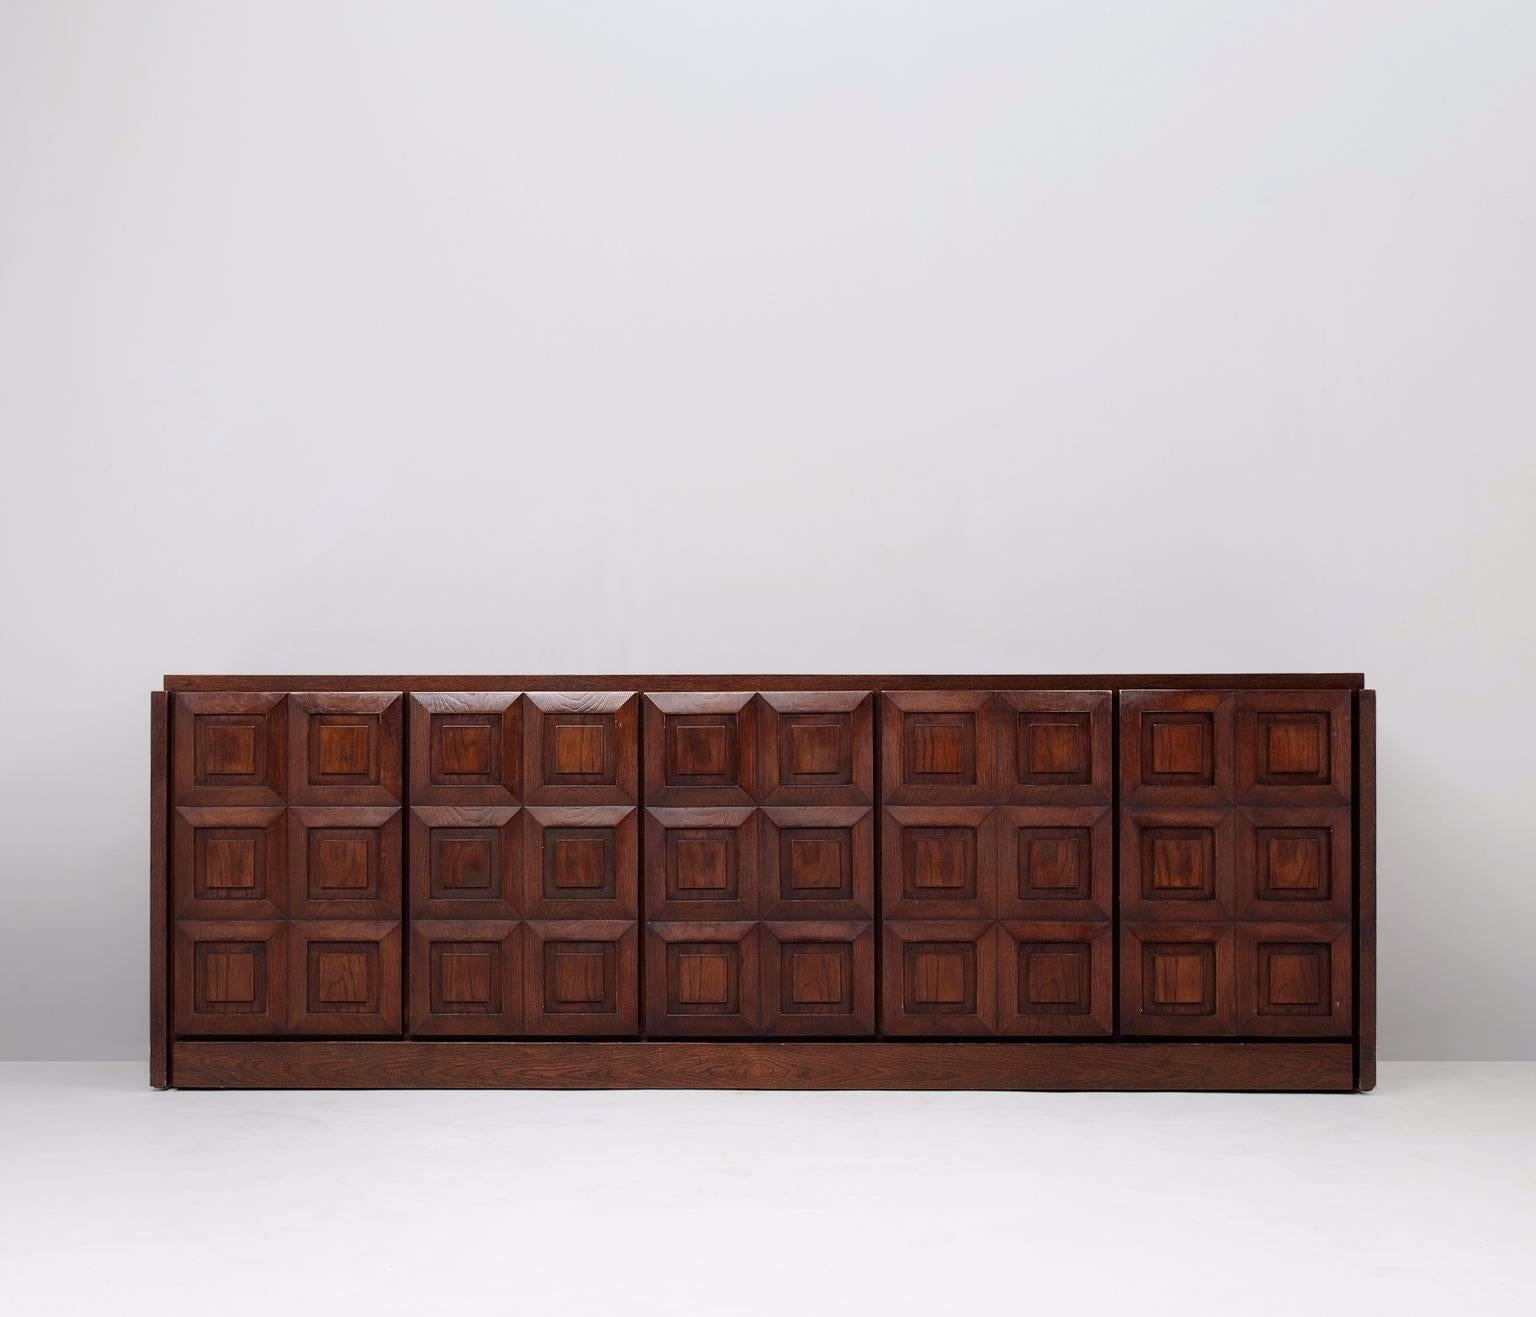 Brown Brutalist credenza, European 1970s.

Large Brutalist credenza in oak veneer with graphical designed doorpanels.
Five doorpanels, each with a three-dimensional pattern of six squares, wich gives the cabinet a very strong expression.
 
The